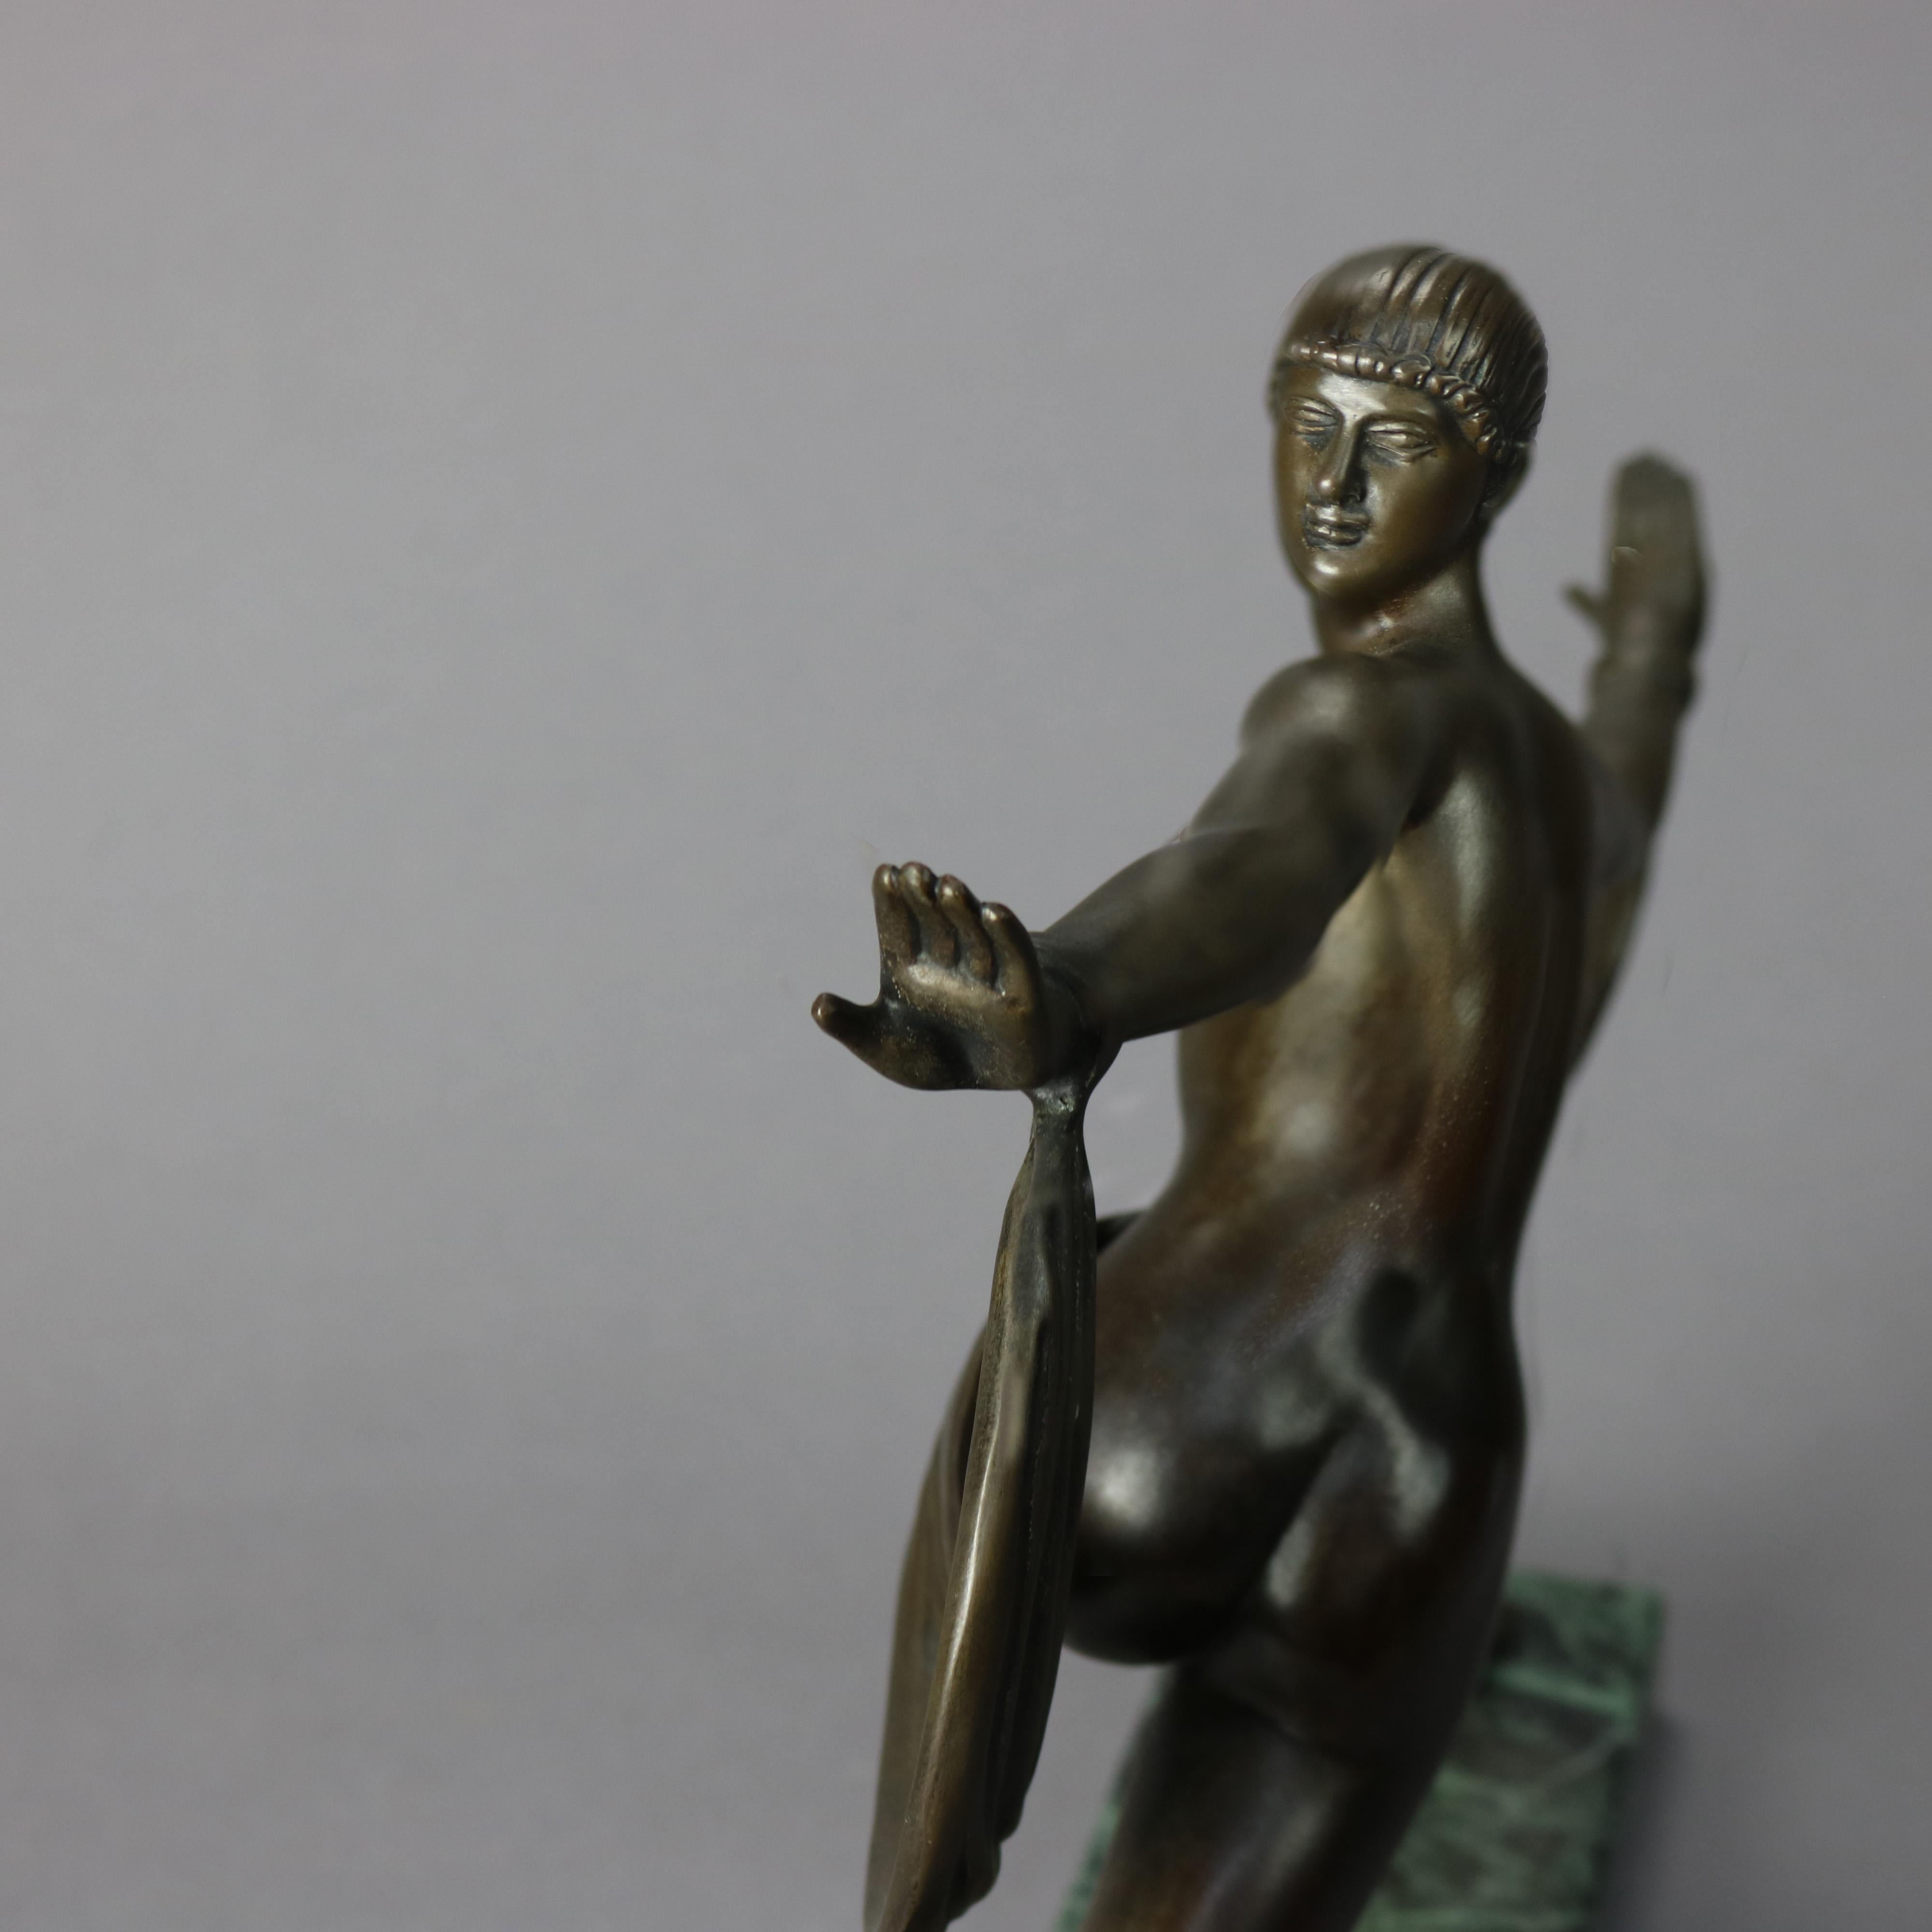 Antique French Bronzed Metal Sculpture of a Woman, Signed Paris Buyne, 19th C 2